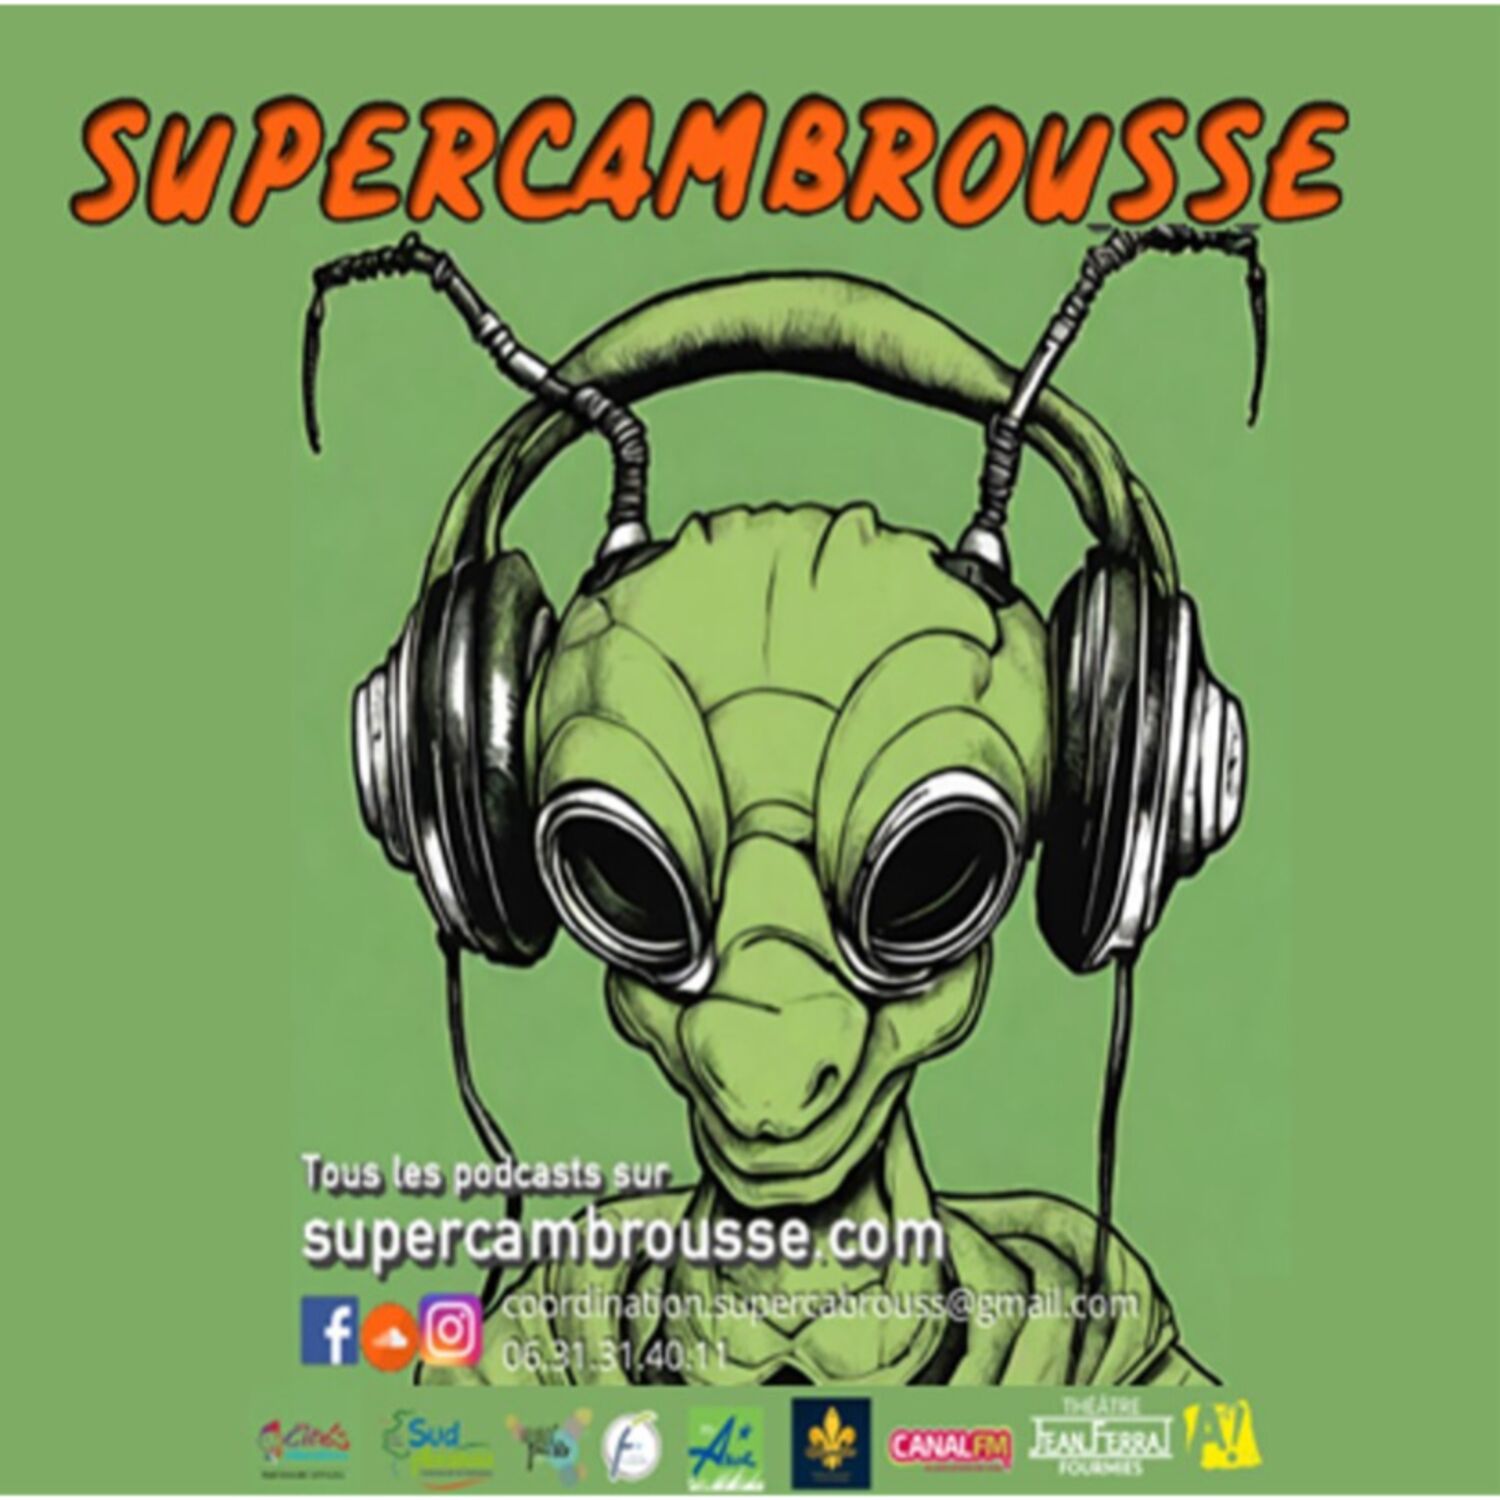 Supercambrousse